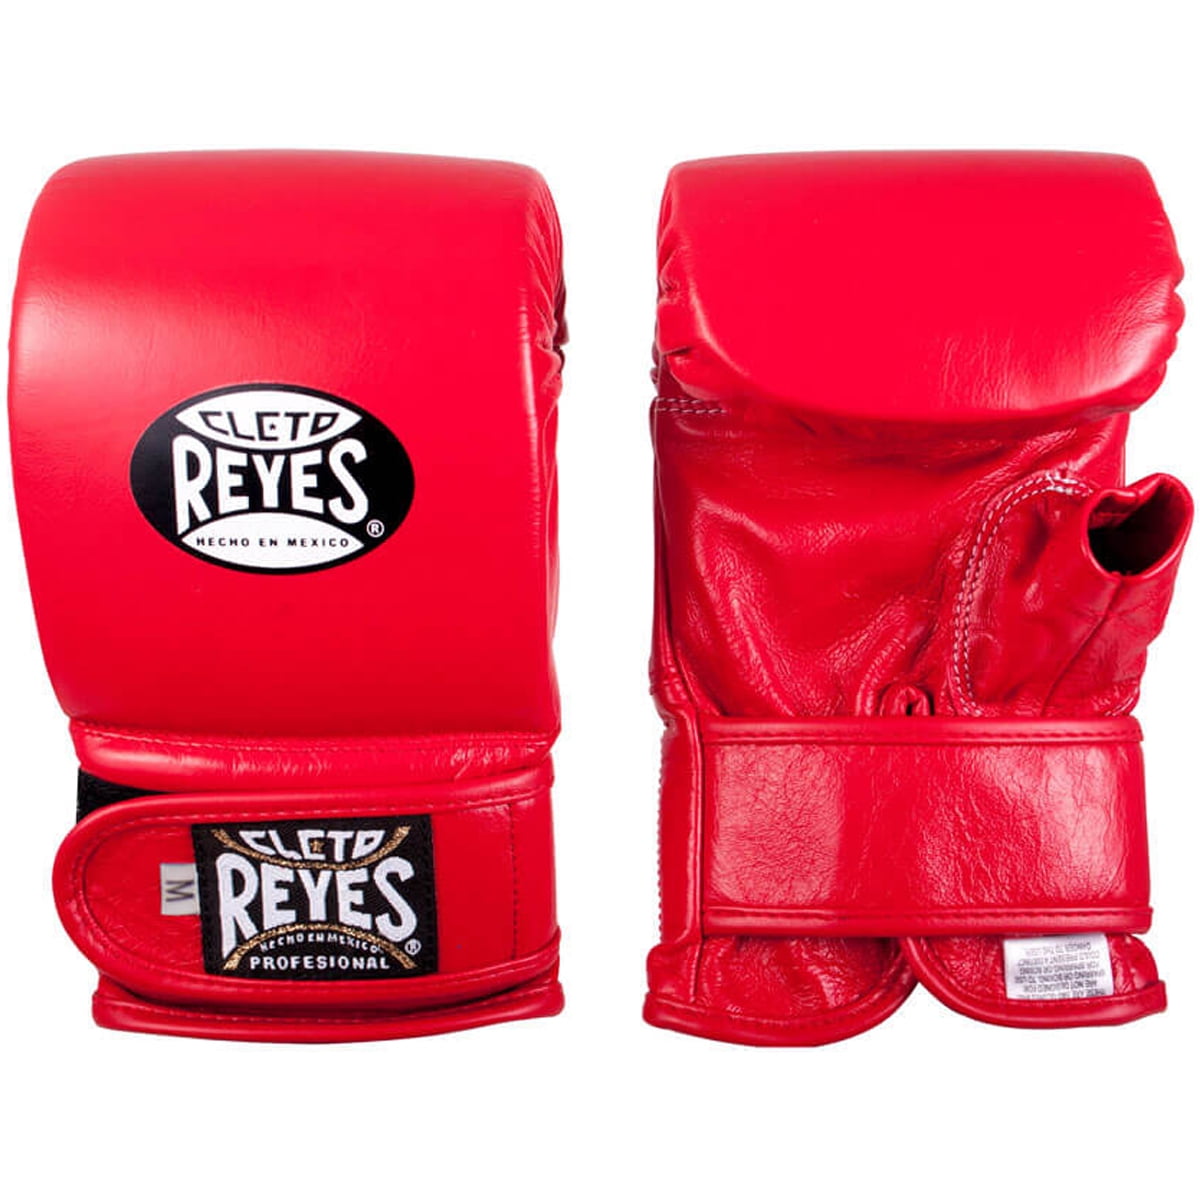 Cleto Reyes Training Gloves Hook and Loop Closure WBC Edition & Free  Shipping